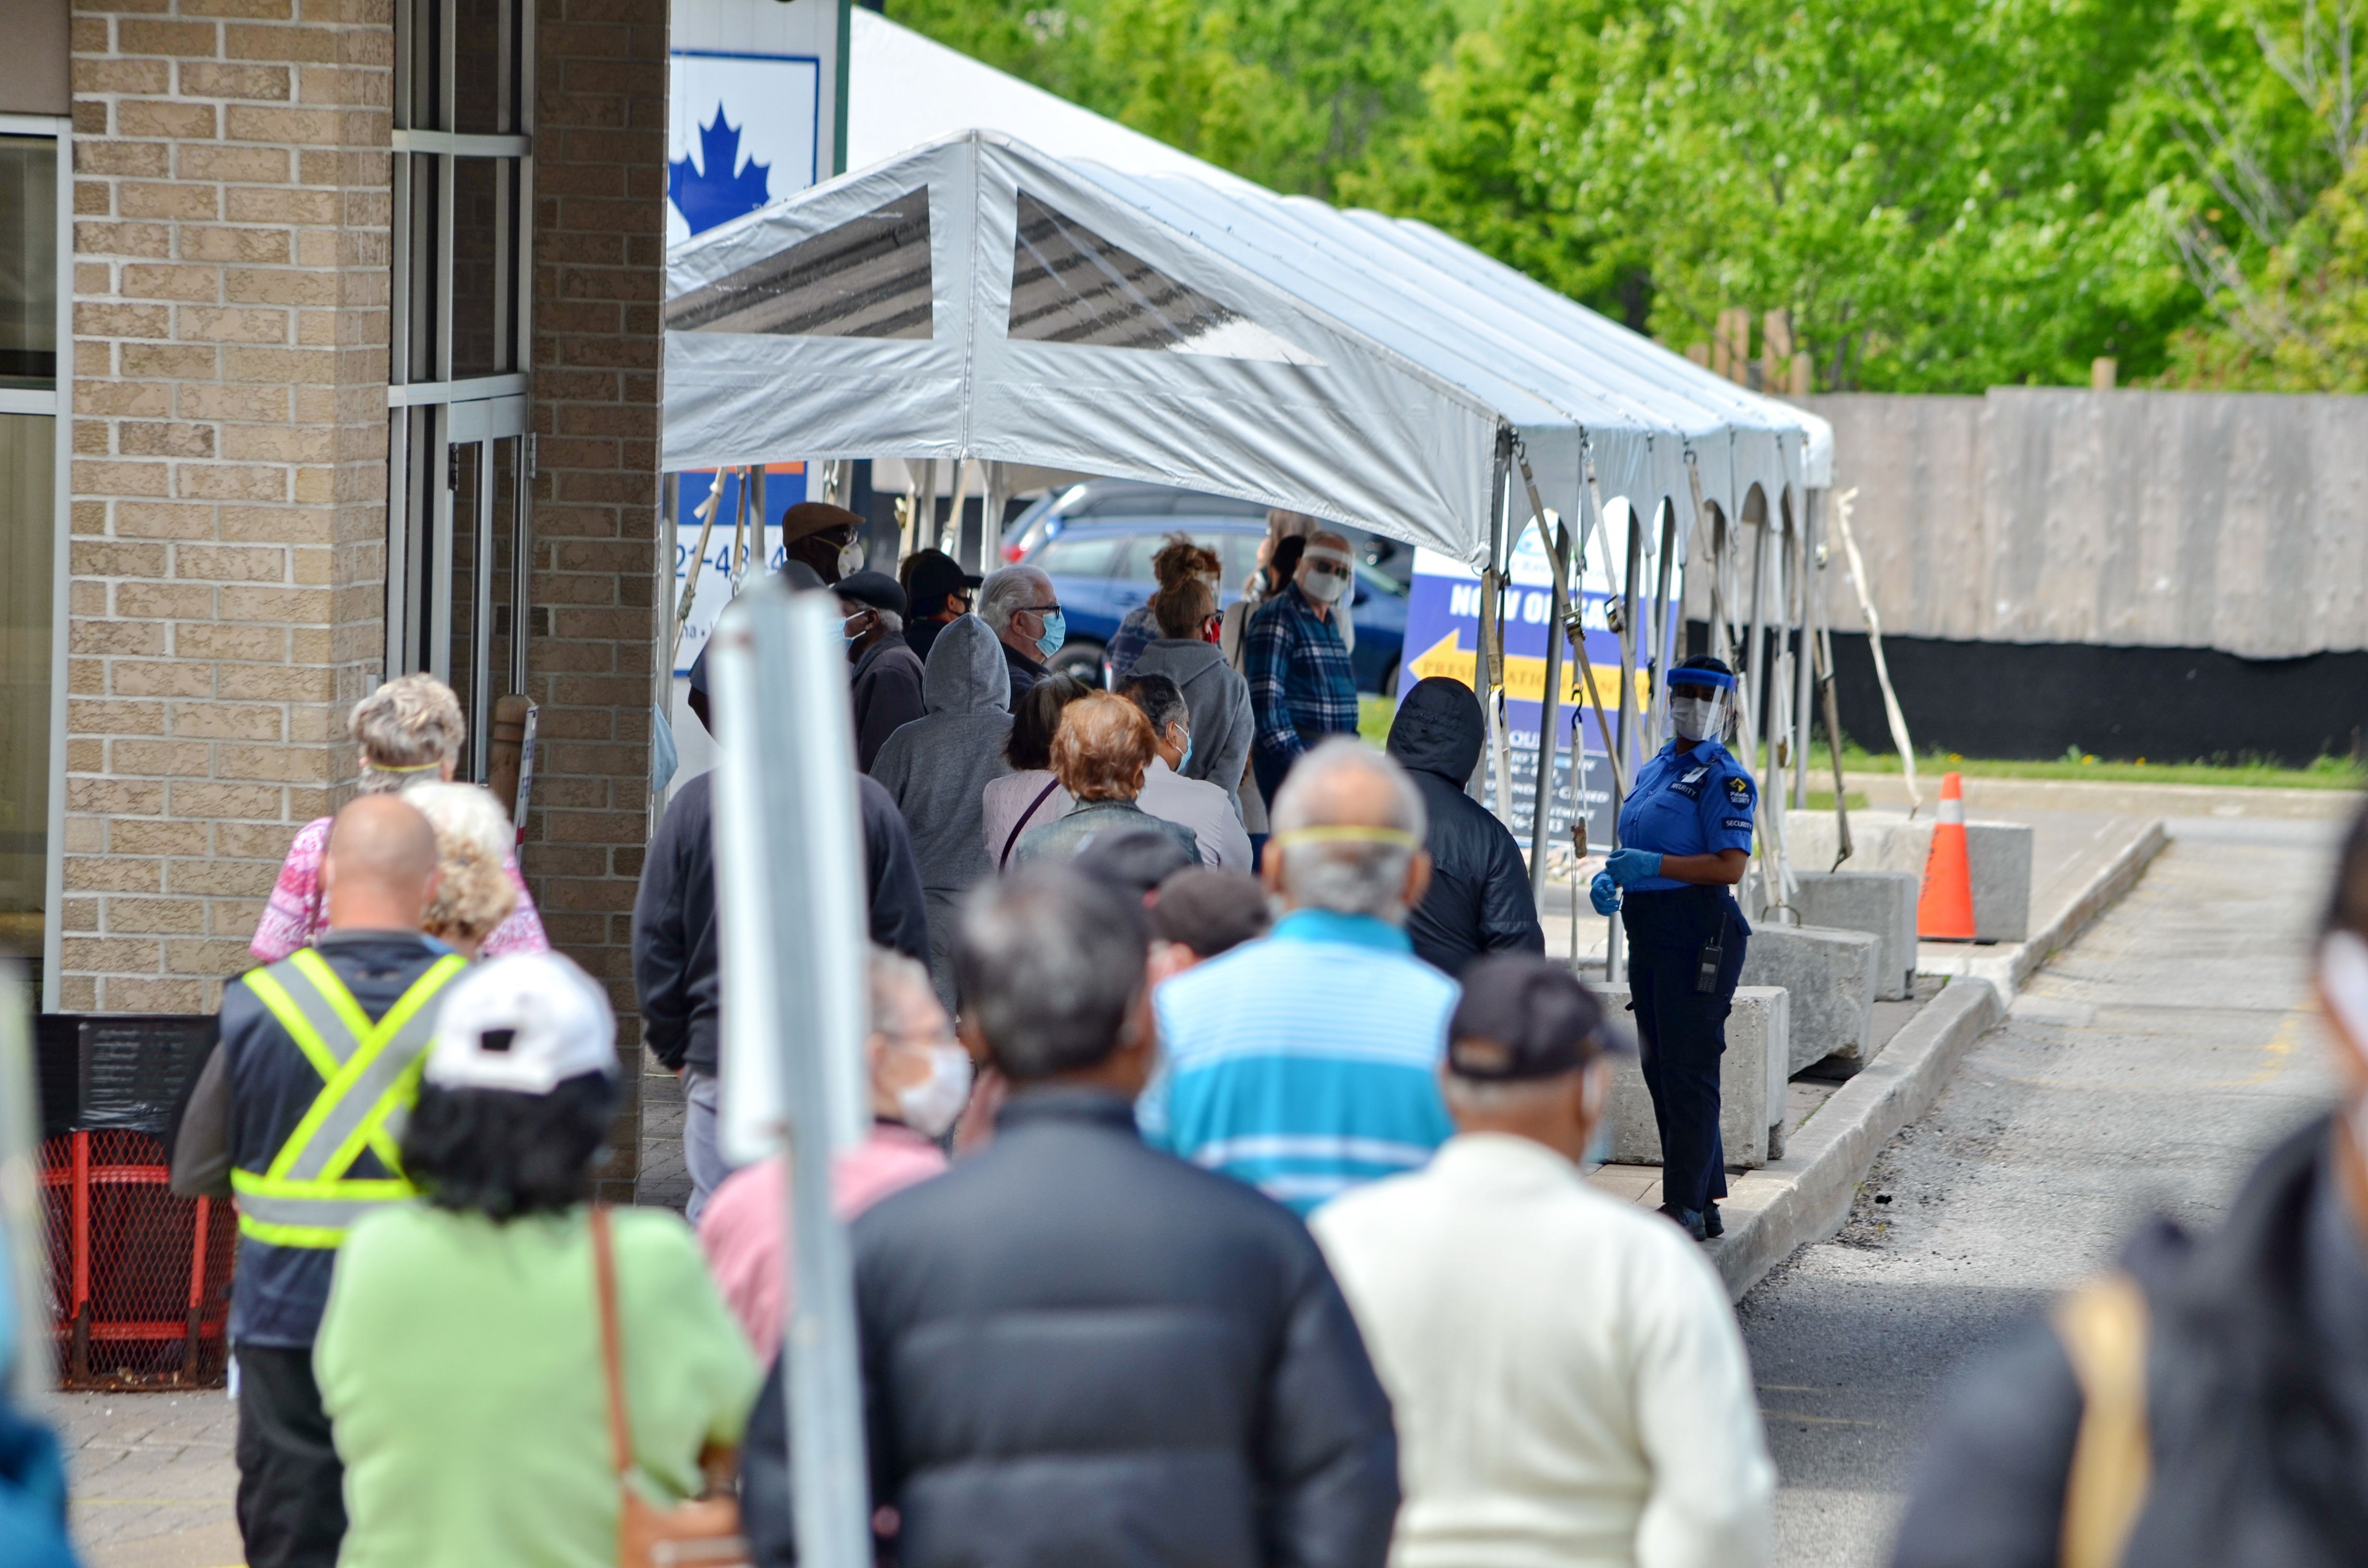 People wait in line for a COVID-19 test at a pop-up mobile Assessment Centre. Image by Bob Hilscher/Shutterstock. Canada, 2020.